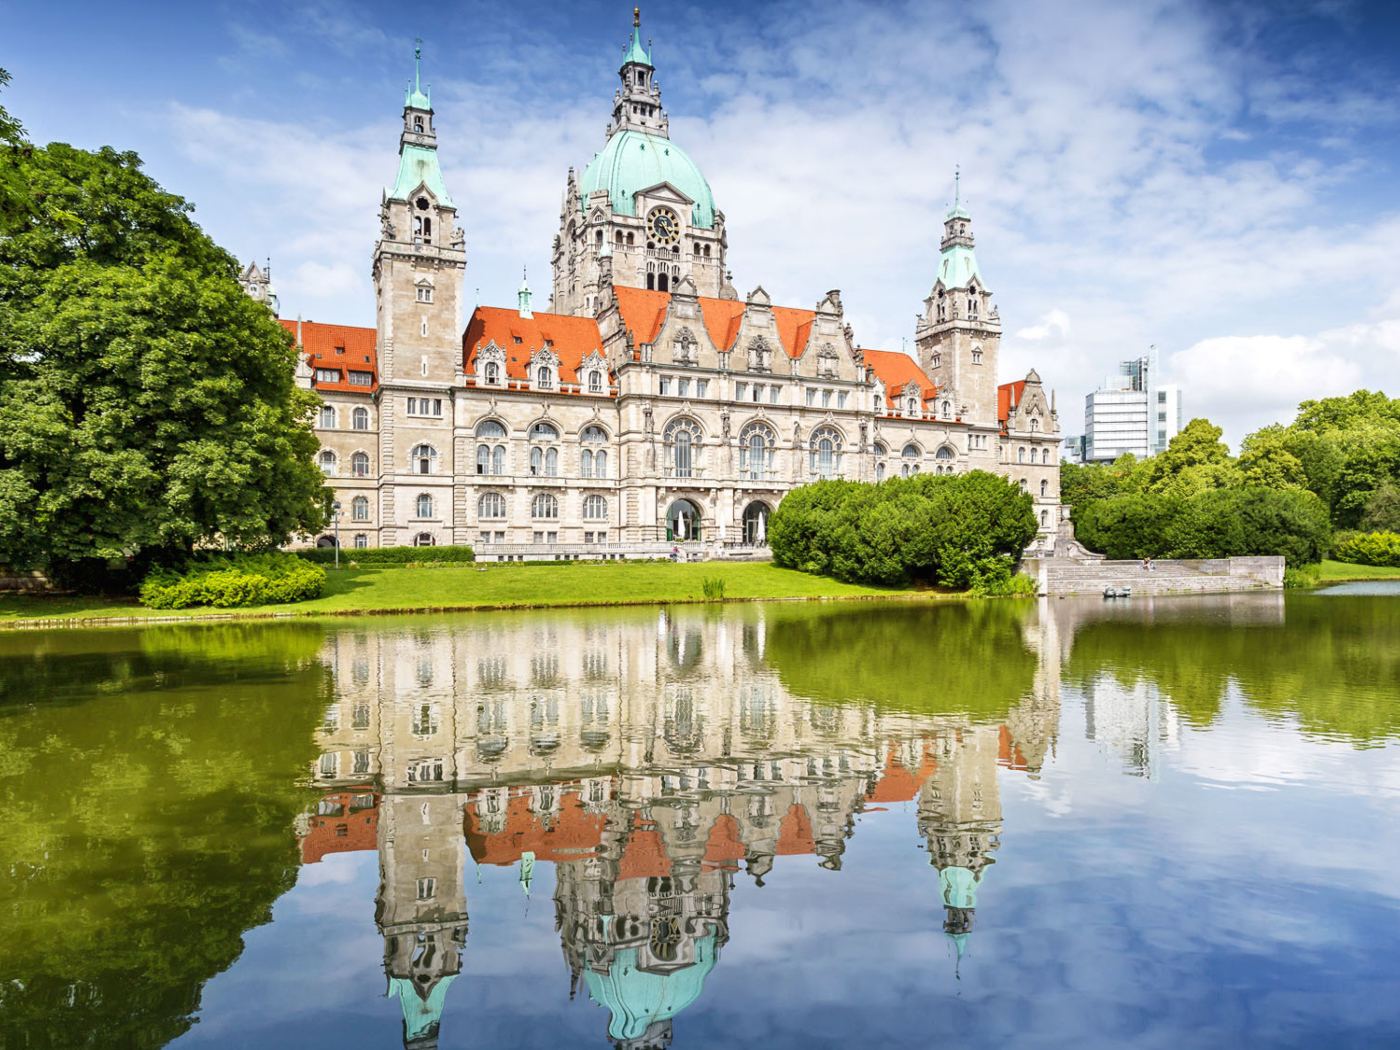 The Town Hall of New Town Hall is reflected in the water, Hannover, Germany